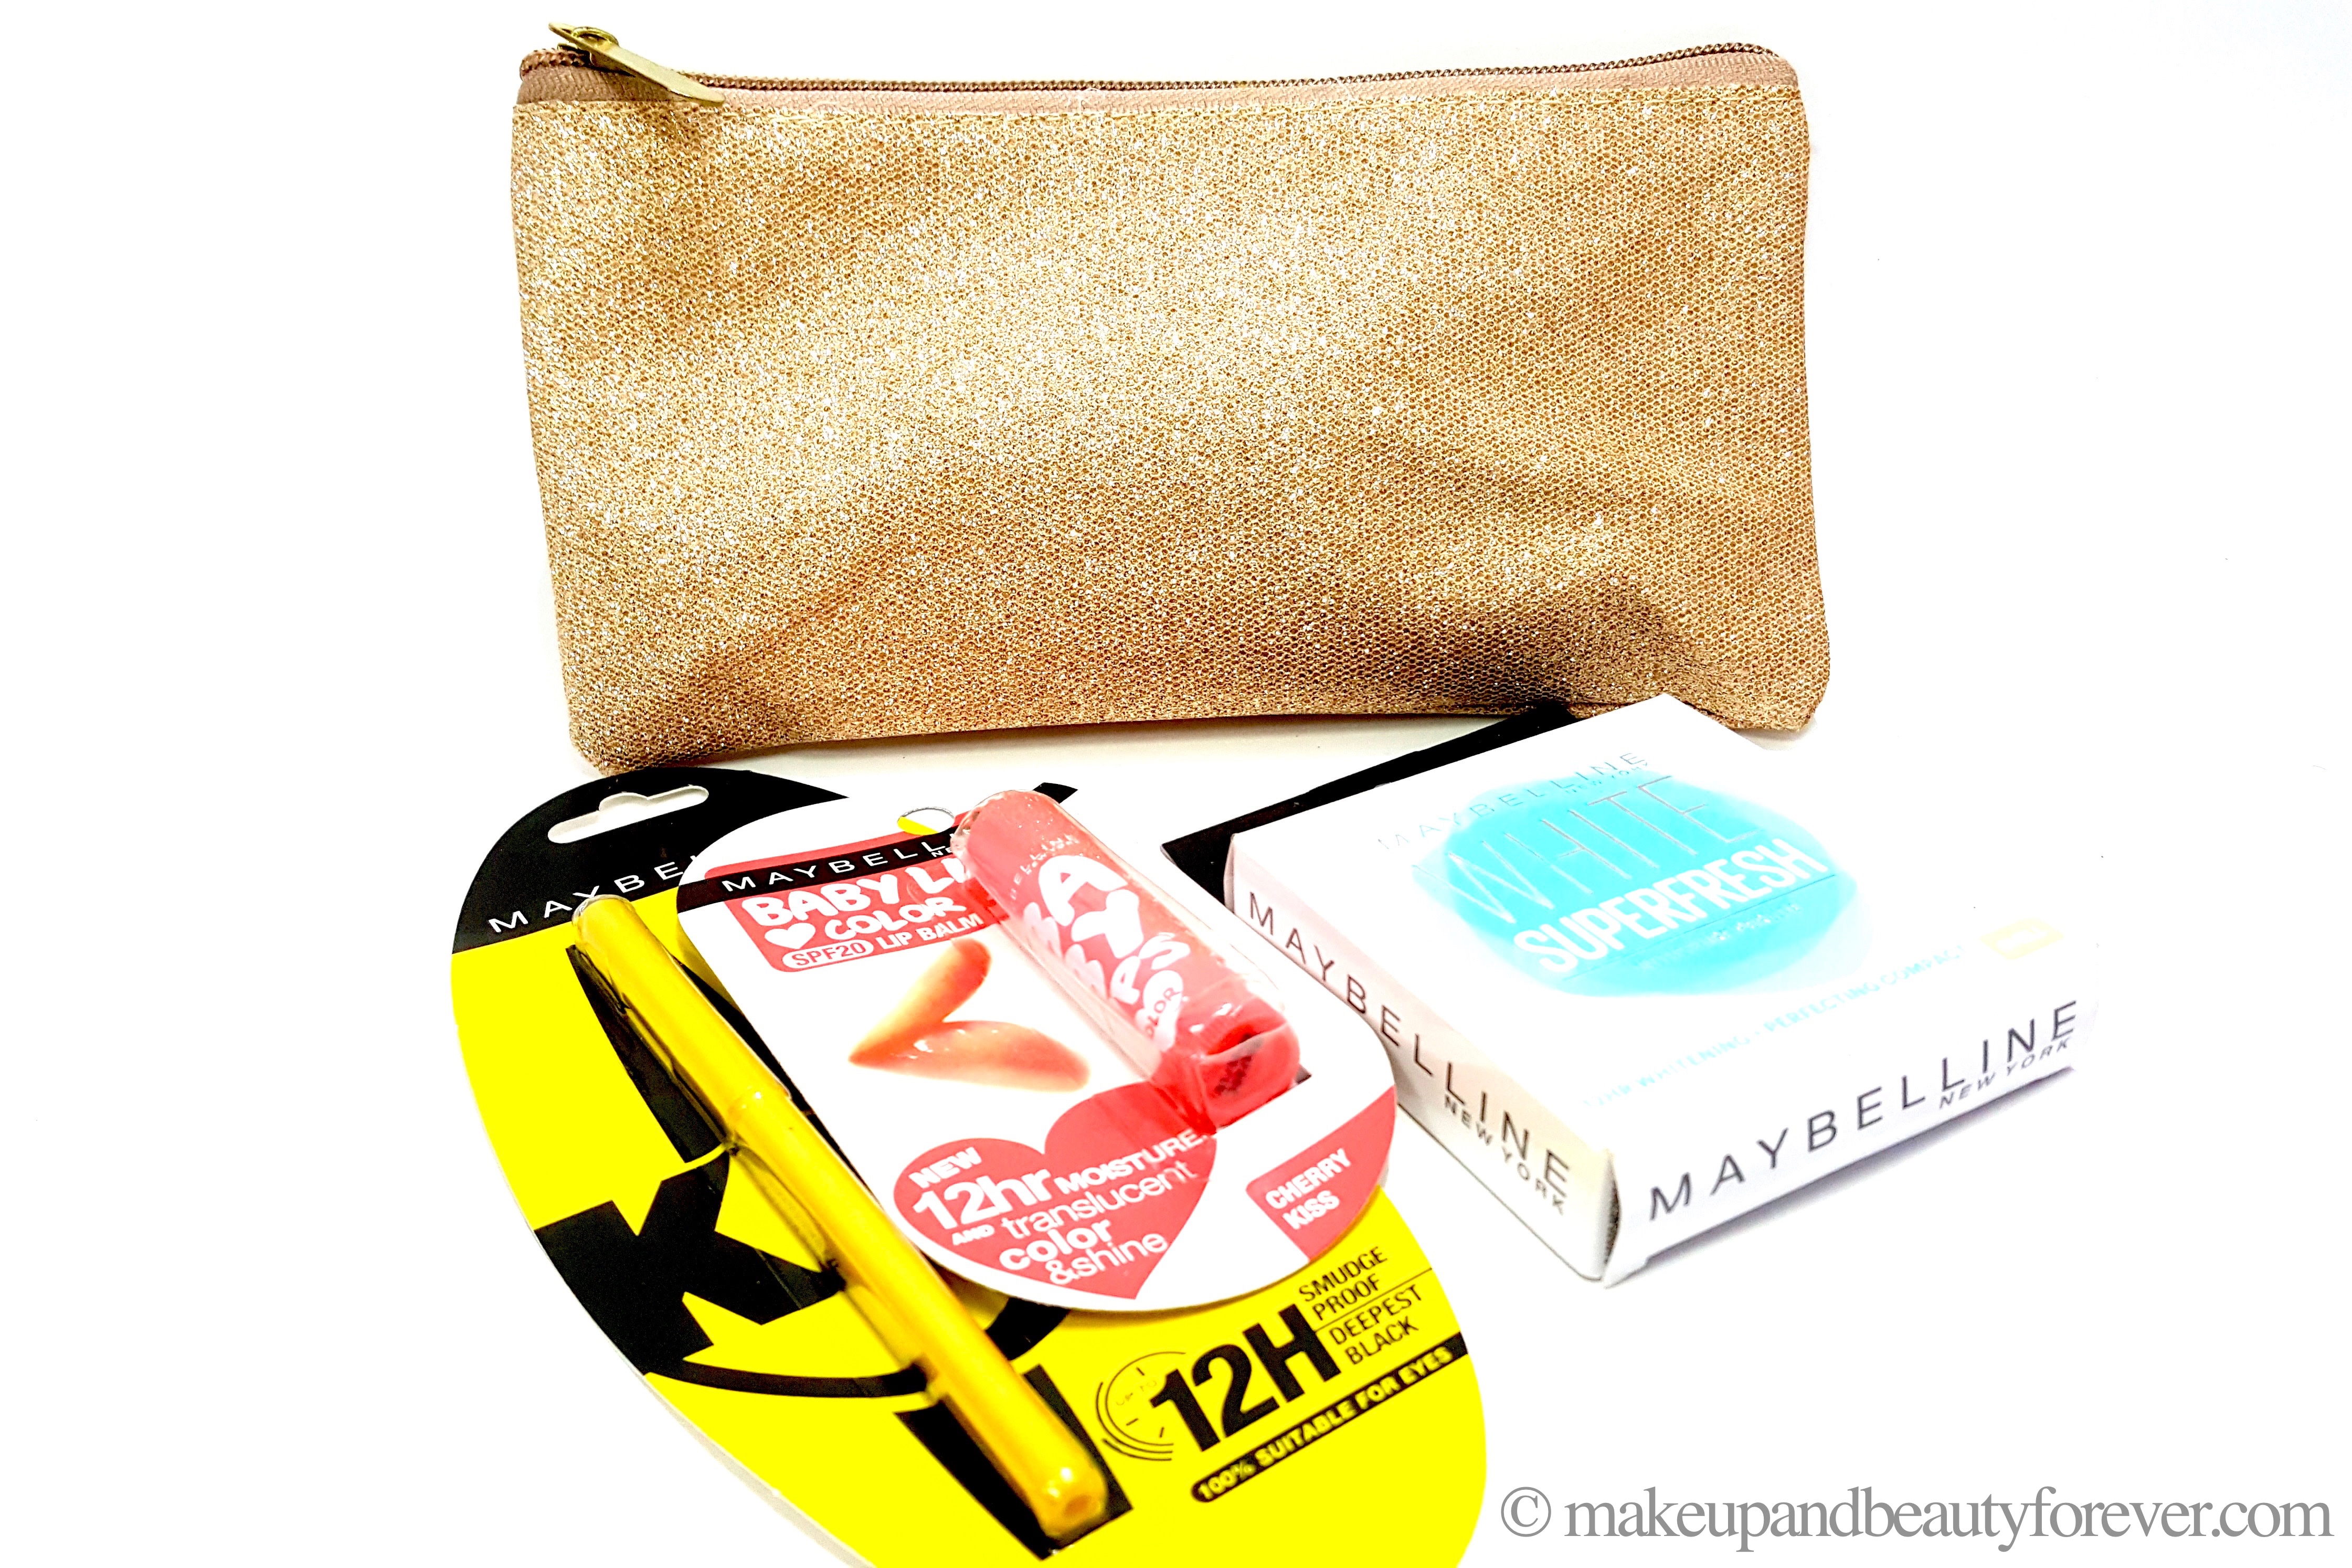 Maybelline New York Summer Essentials Kit Review